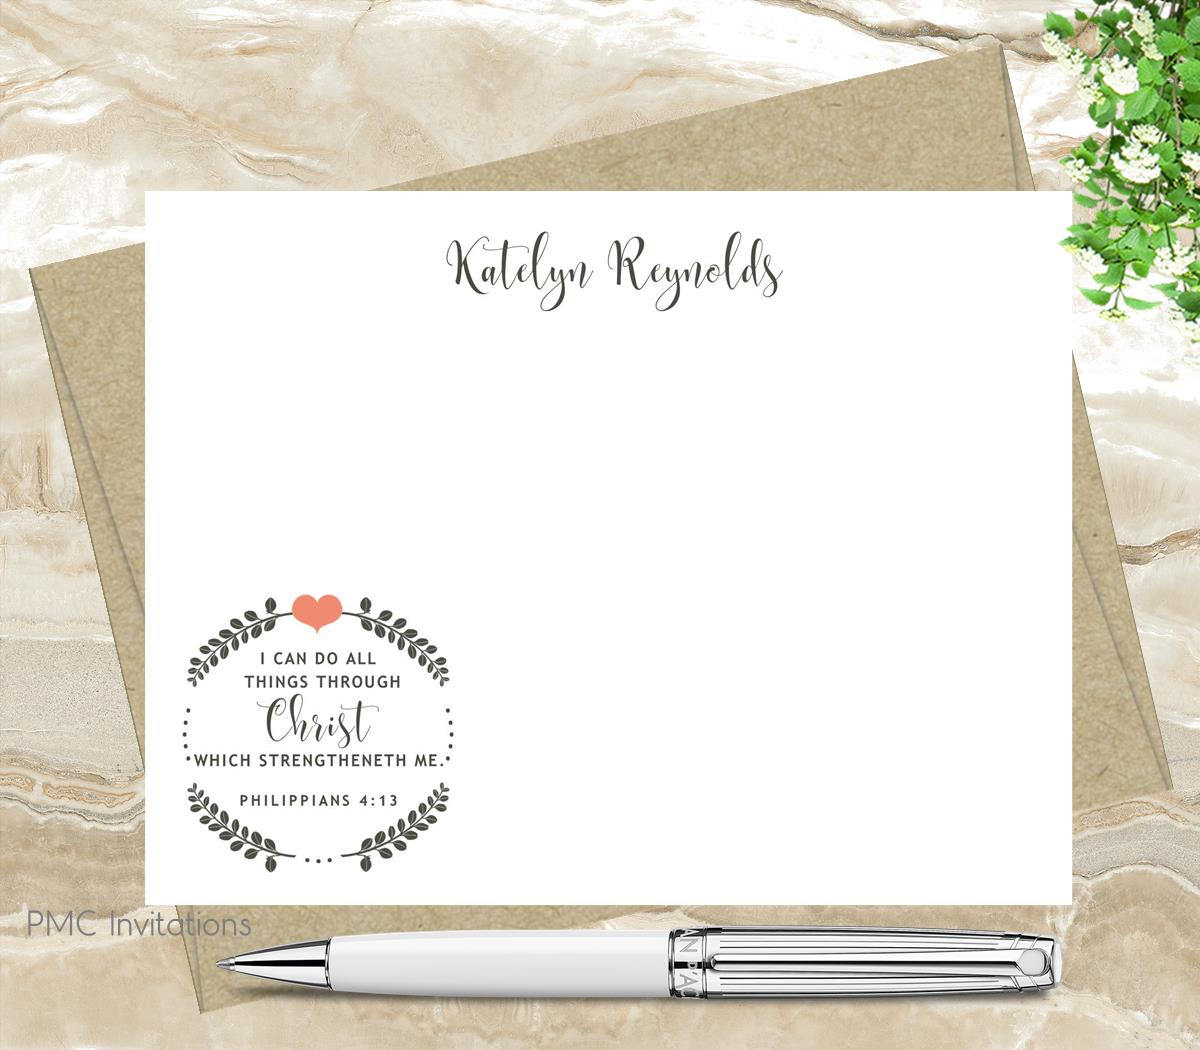 Personalized Stationary, Stationery Cards, Teacher Gift, Modern